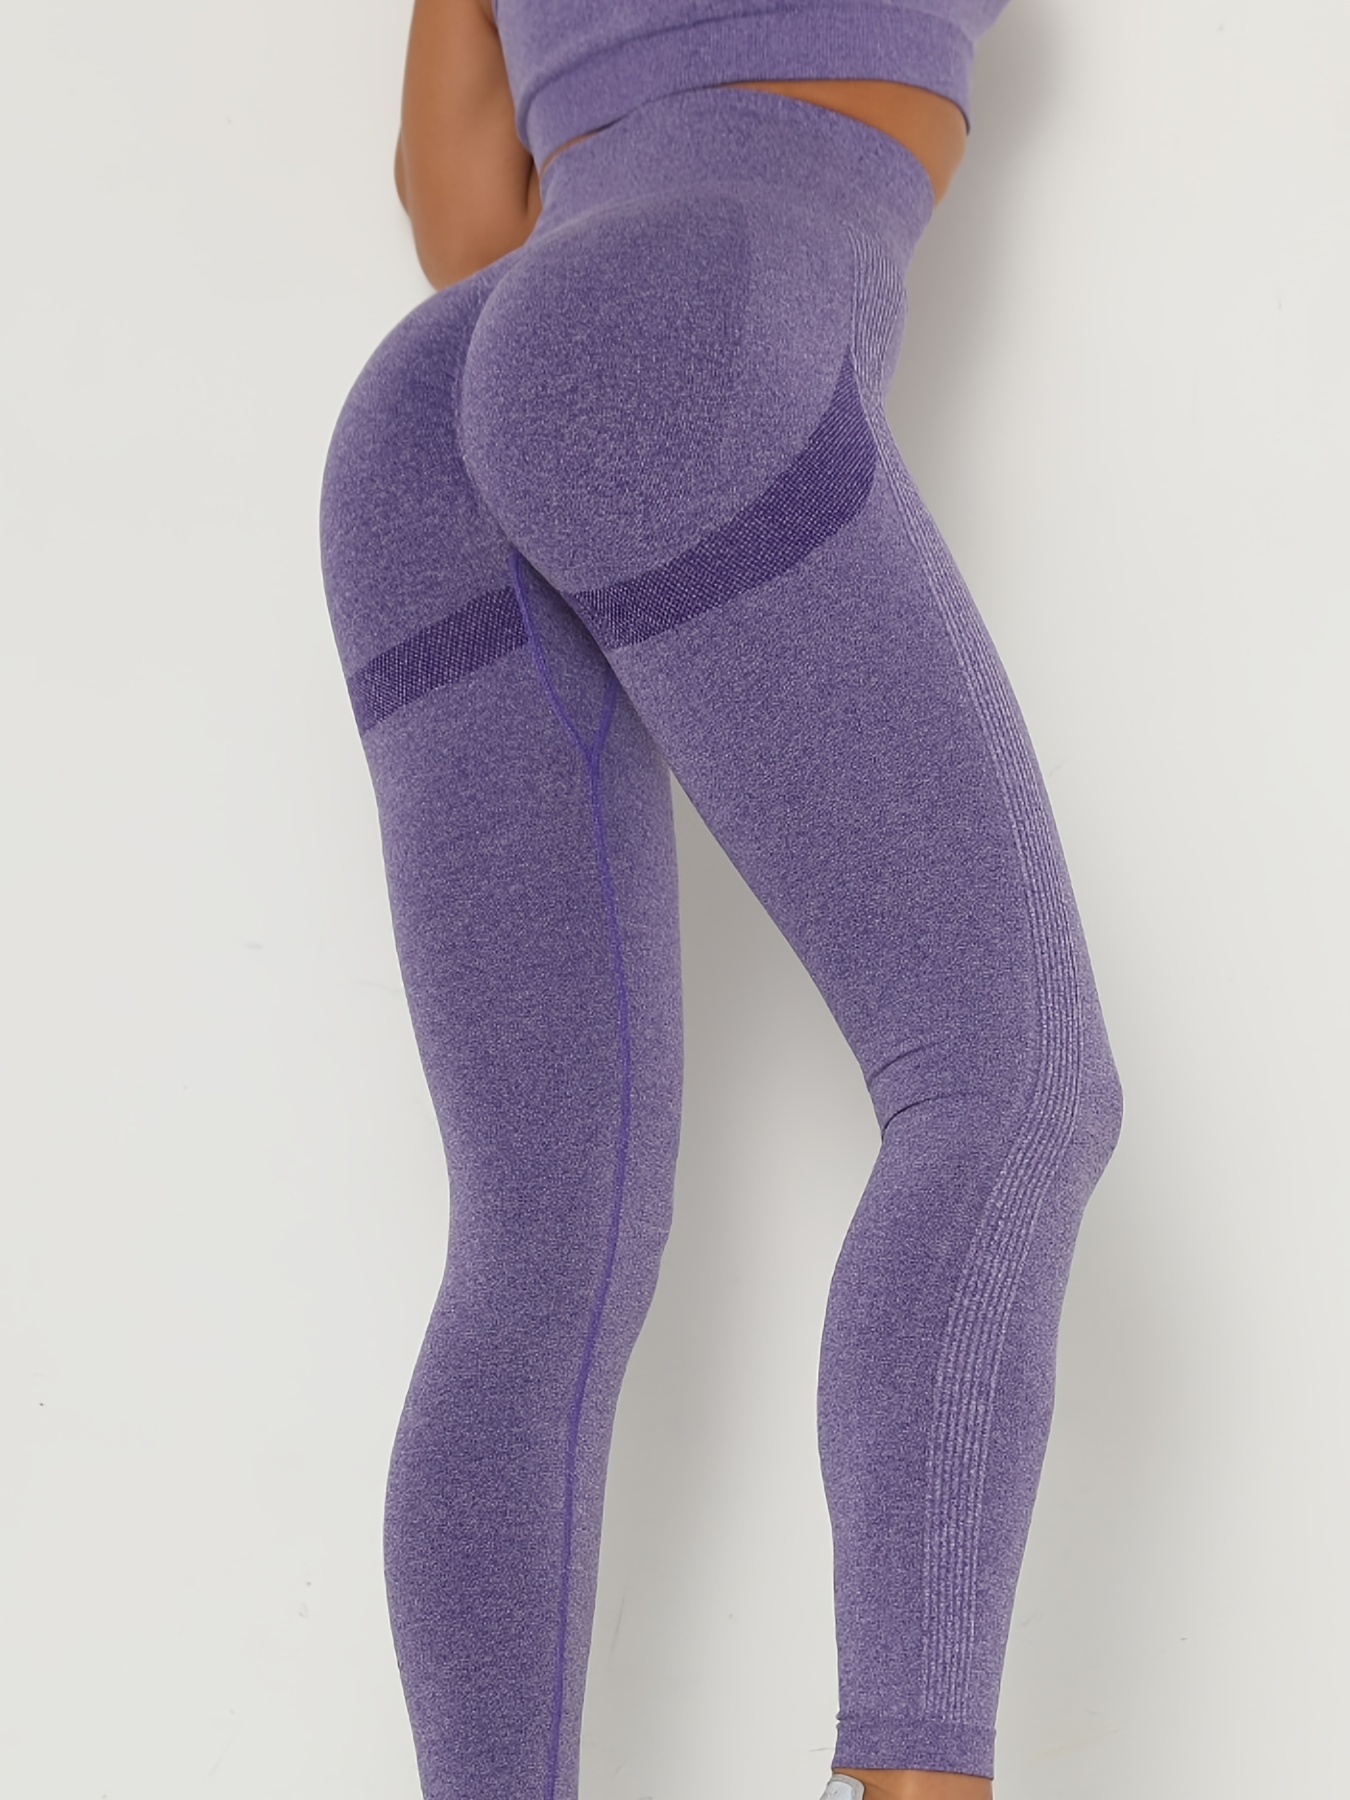 The Beginning Of… TBO Workout Leggings for Women - Booty Lifting Seamless  Compression Yoga Pants Lilac at  Women's Clothing store